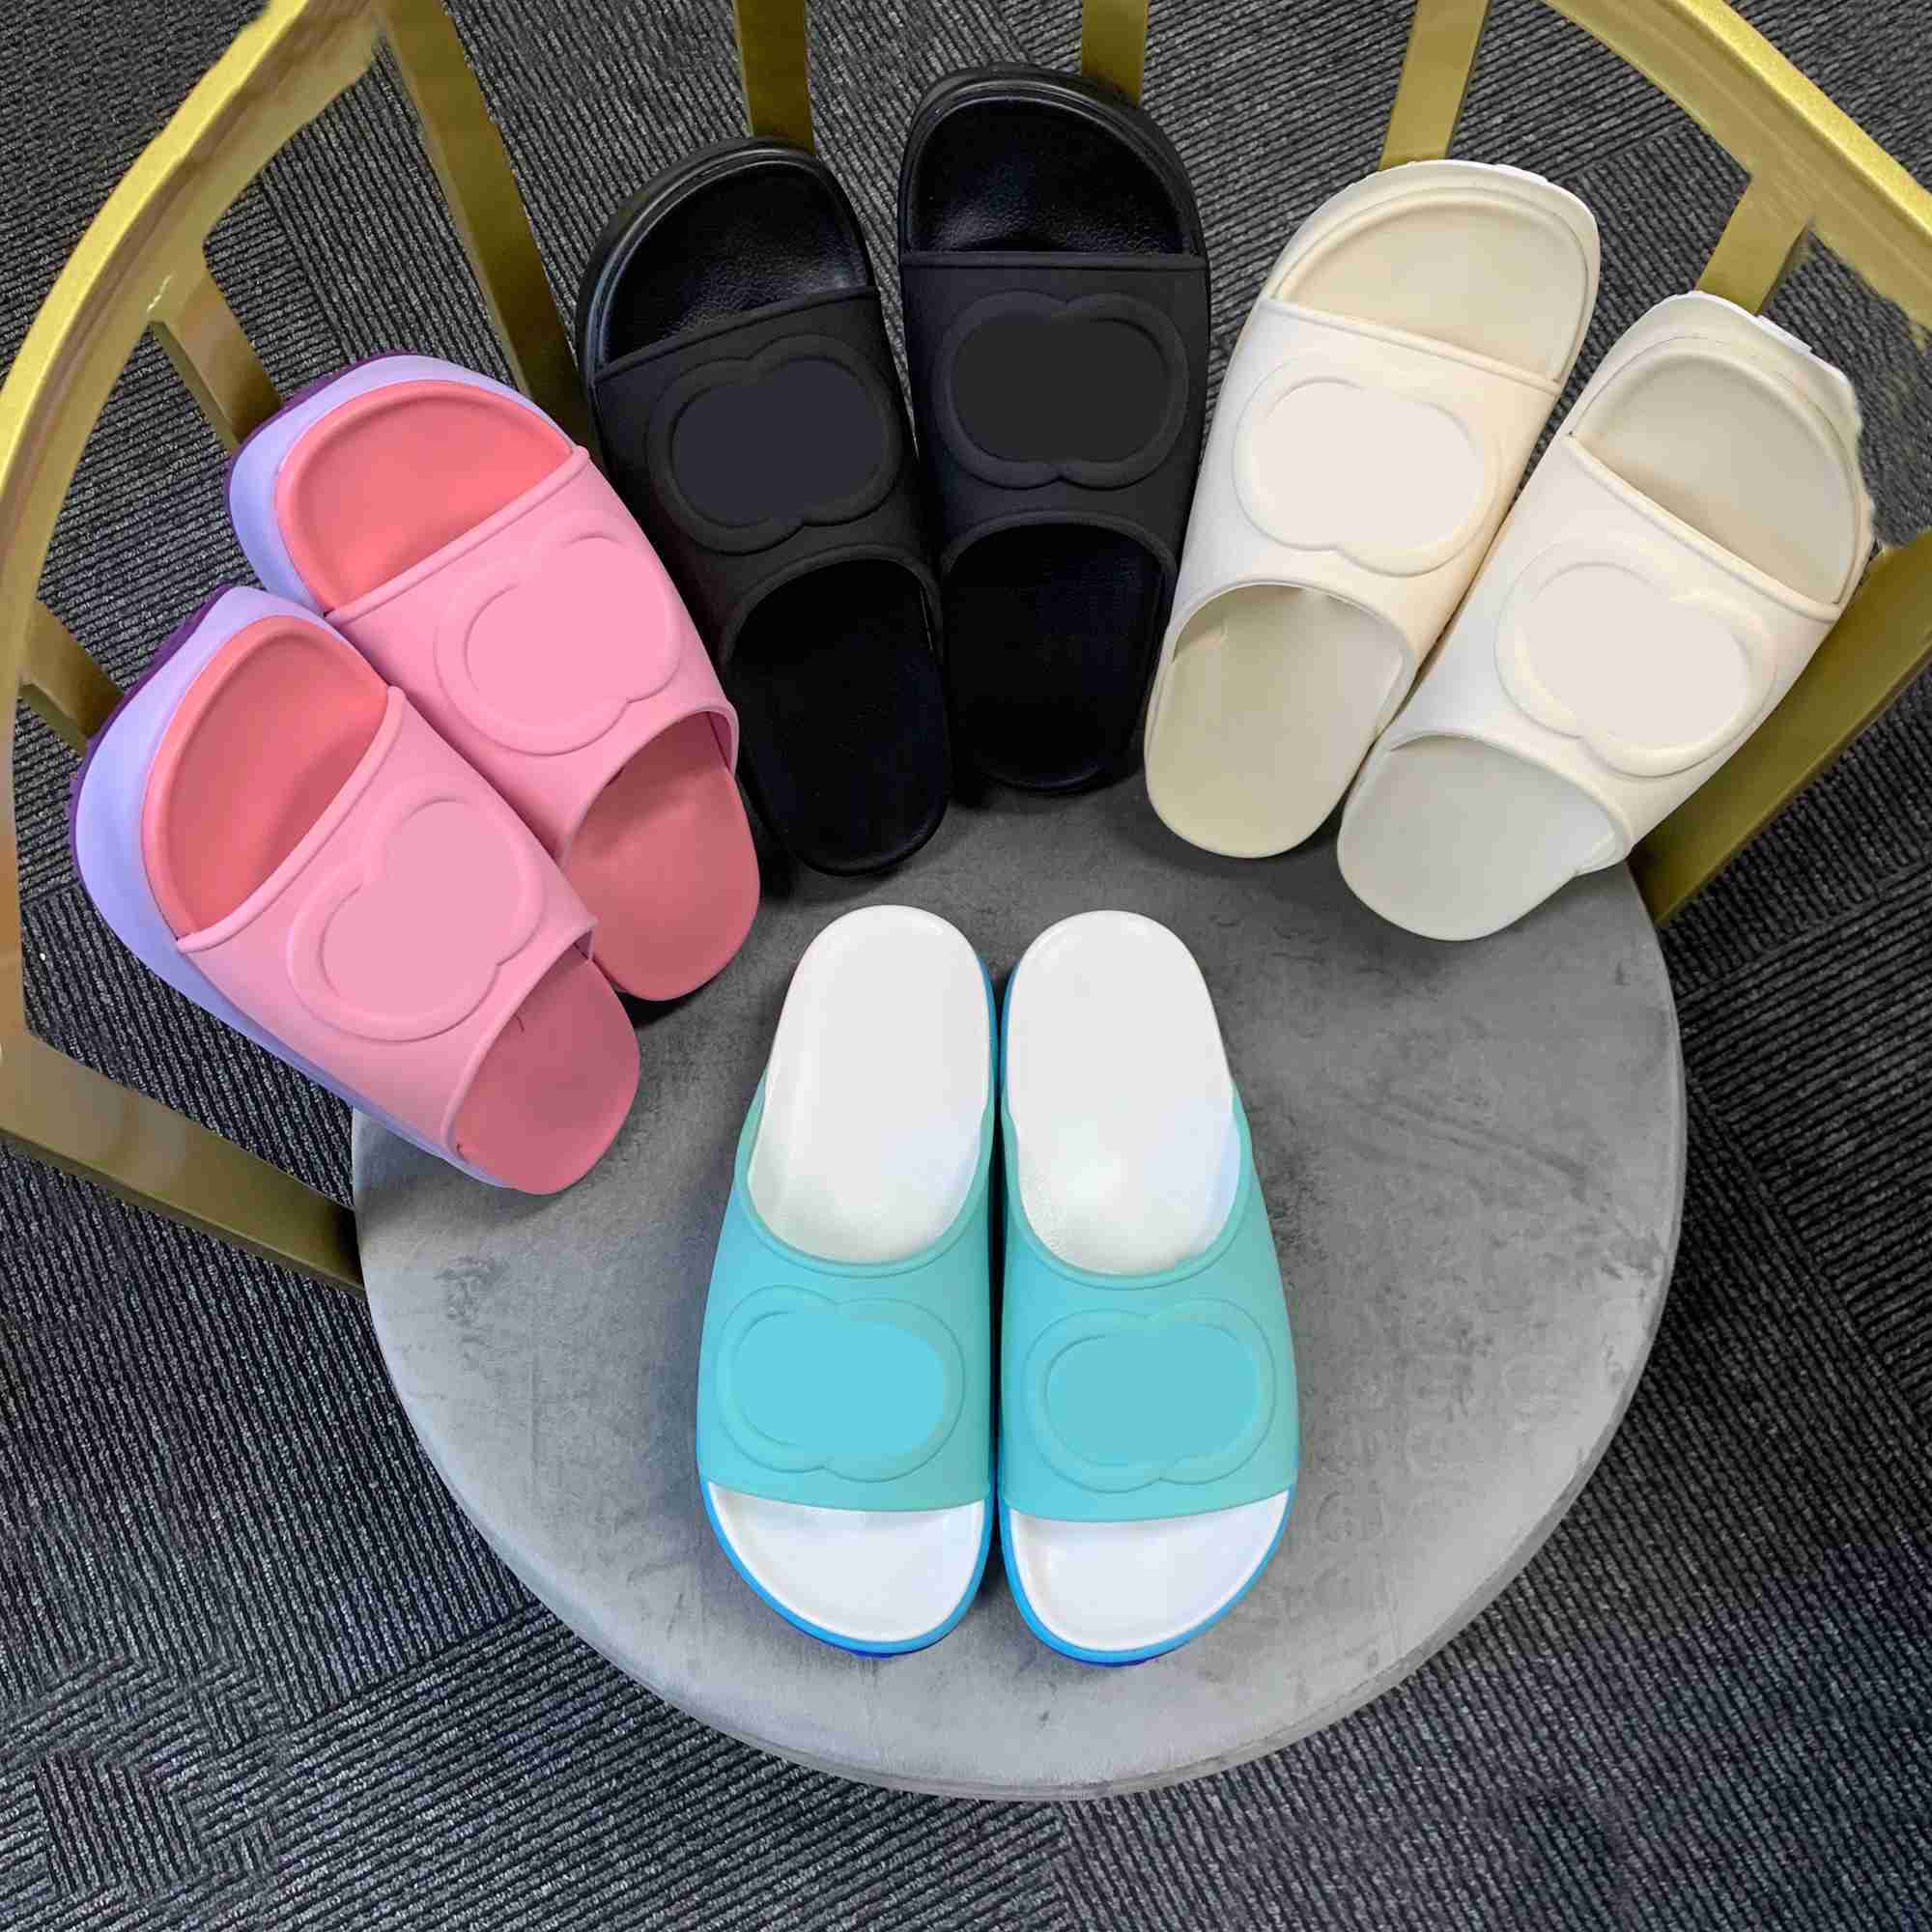 

Interlocking Rubber Slippers Women's Macaron Thick Sole Shoes Purple Turquoise Breathable Non-Slip slipper Home Casual Summer Embossed Mules